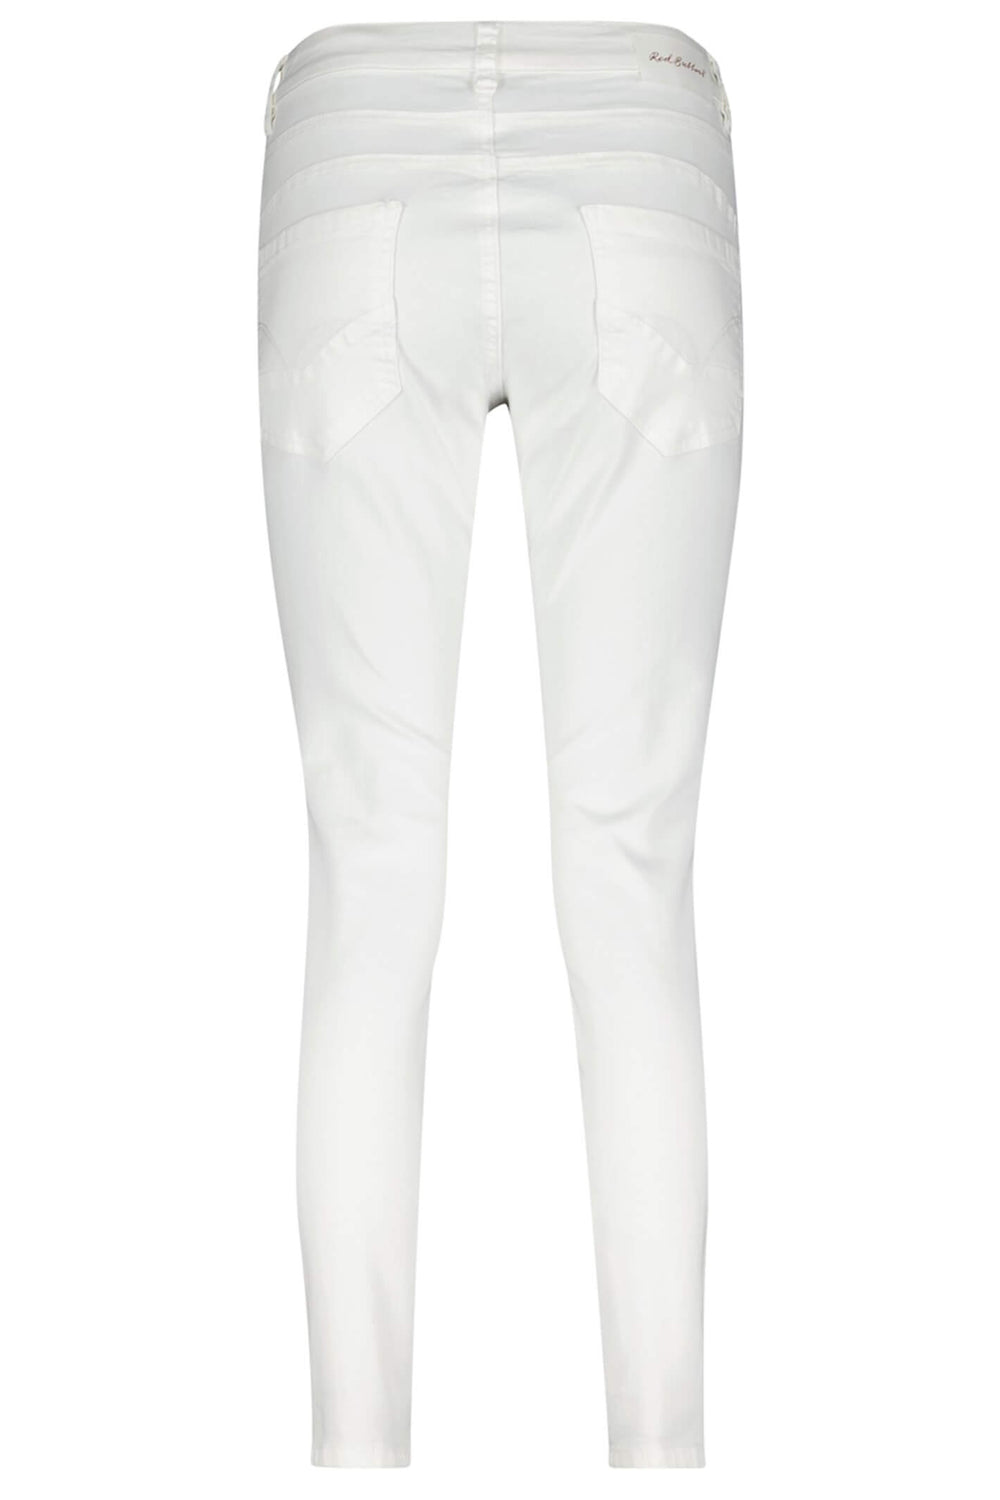 Red button SRB2987 Sissy Off White Embroidered Jeans - Olivia Grace Fashion